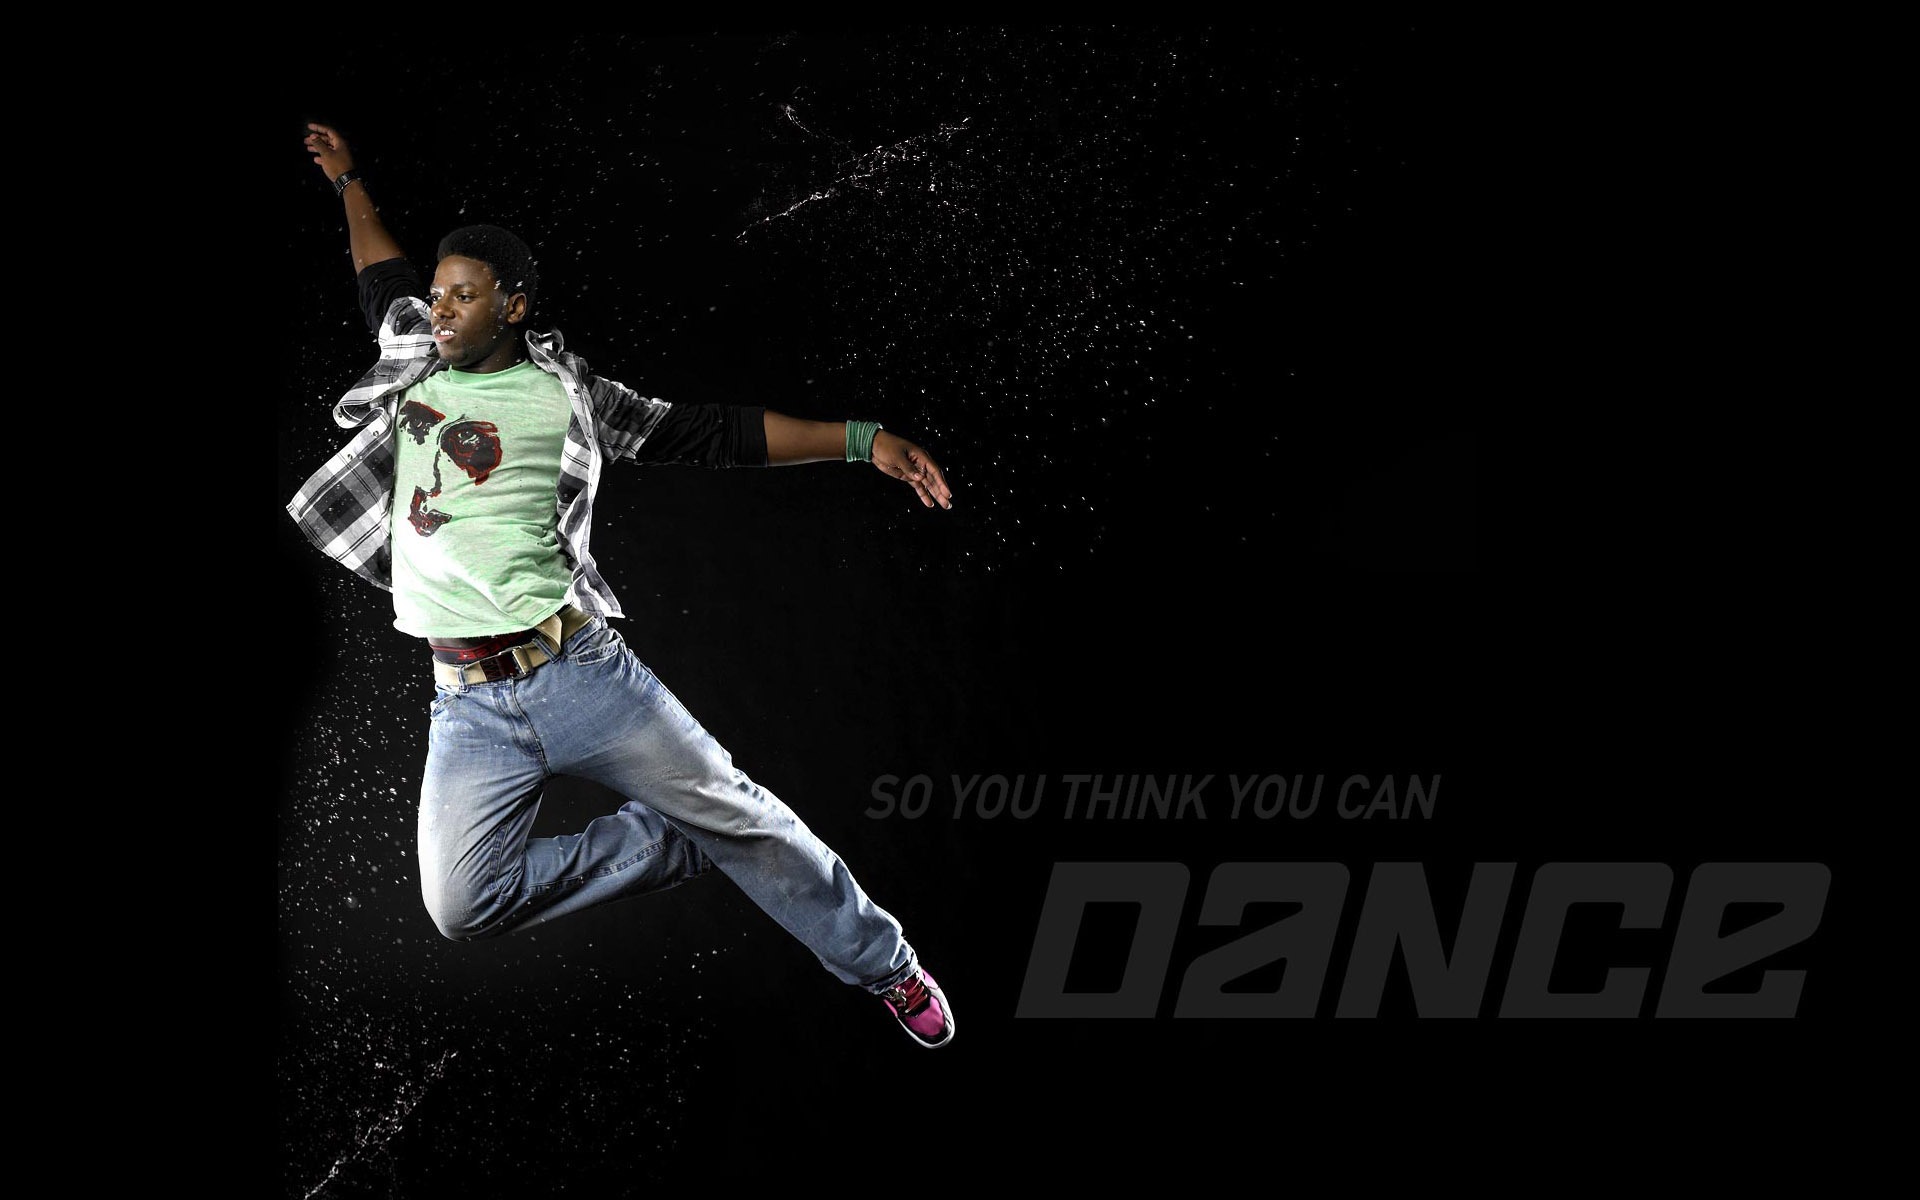 So You Think You Can Dance Wallpaper (1) #18 - 1920x1200